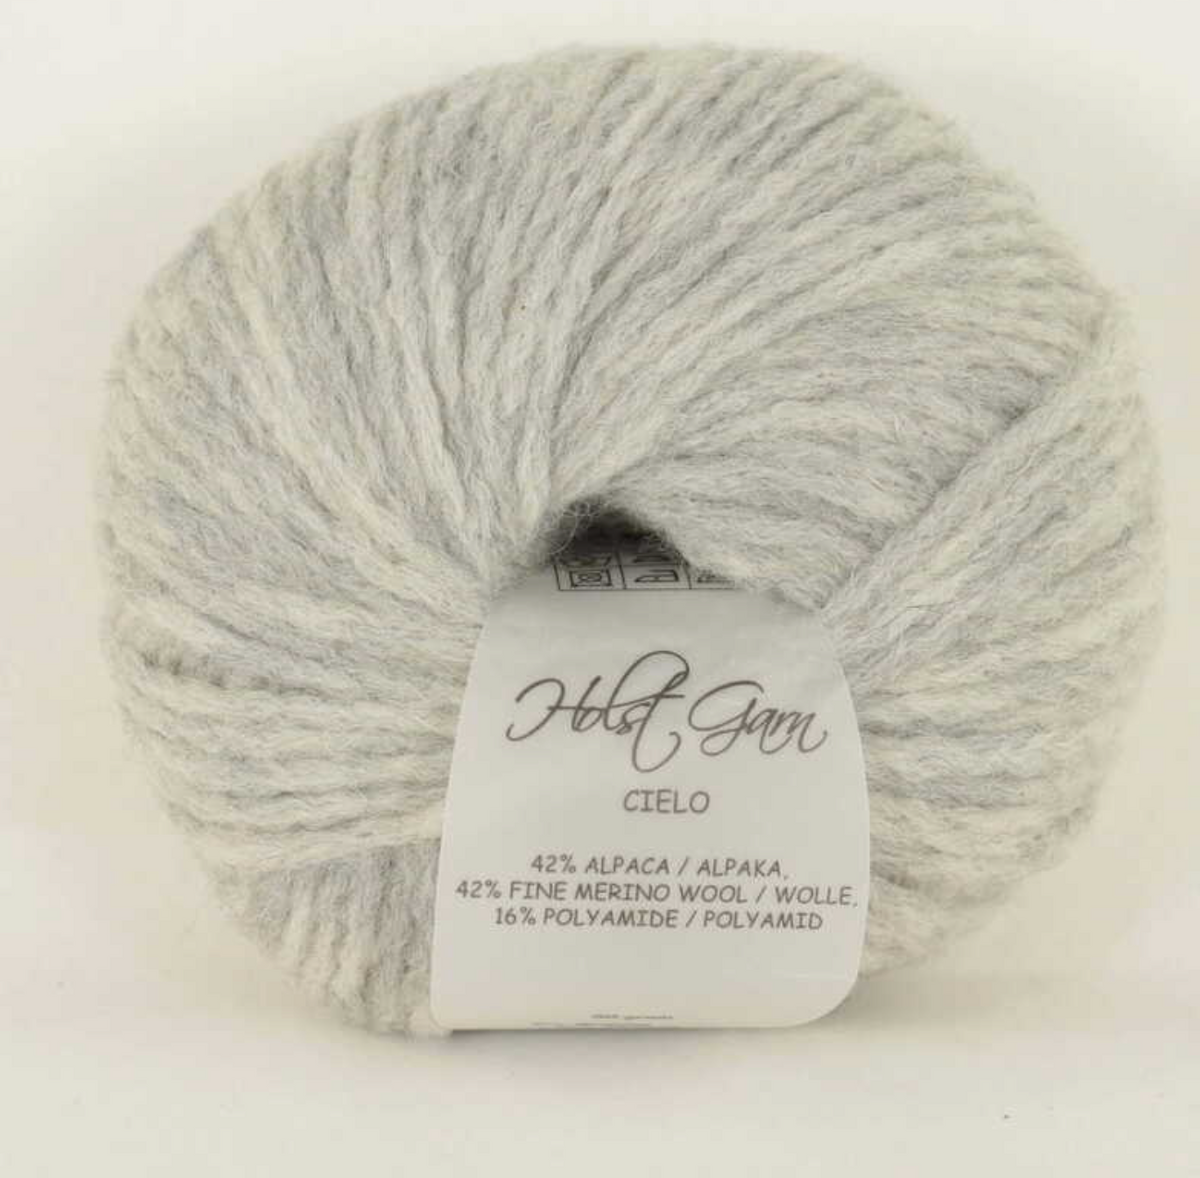 Holst - Cielo - YourNextKnit